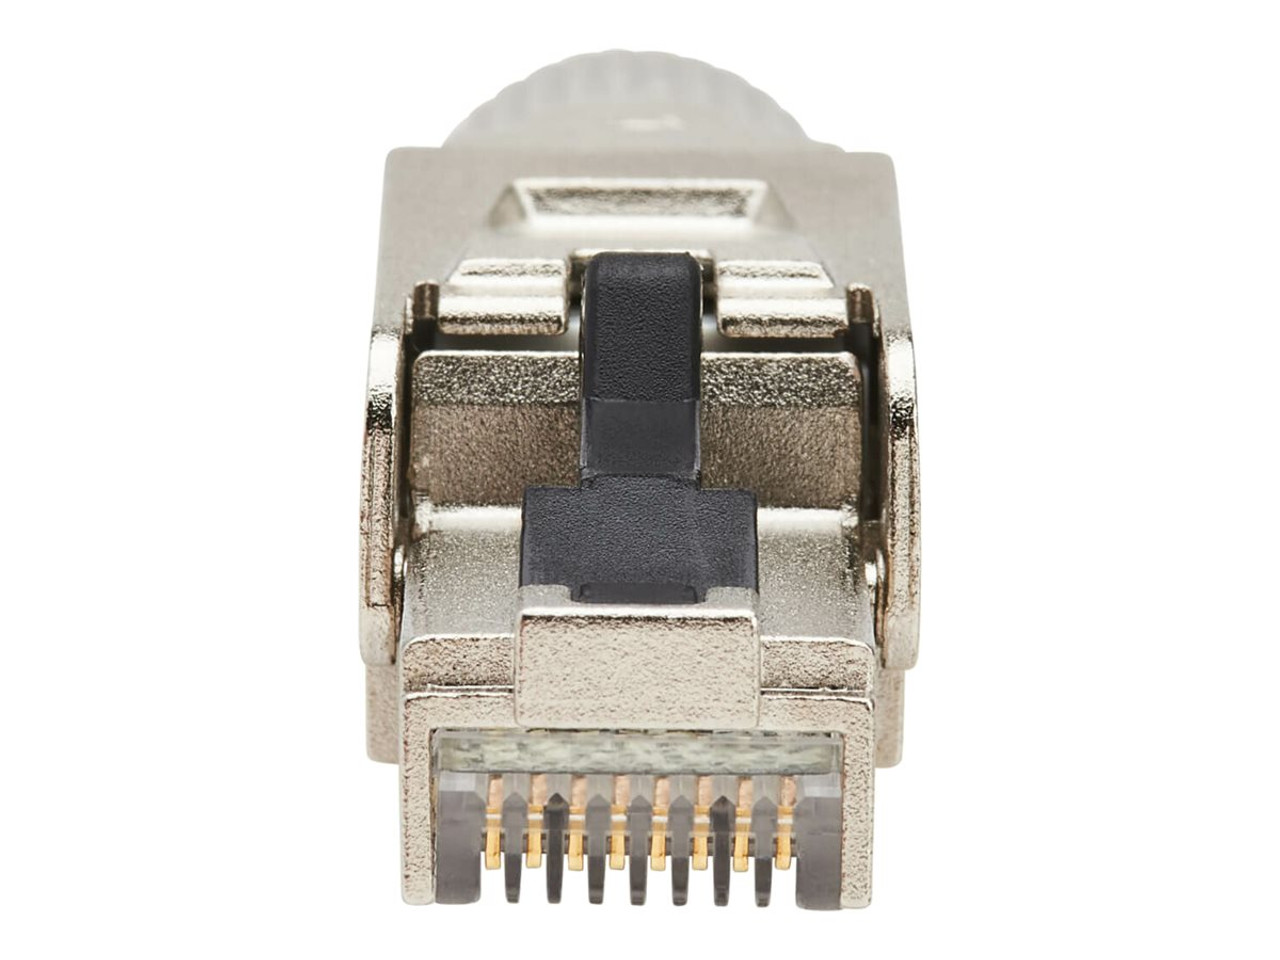 Cat.8 STP 5-Angle Field Termination Plug, Advanced Modular Plug Solutions  for Critical Network Applications